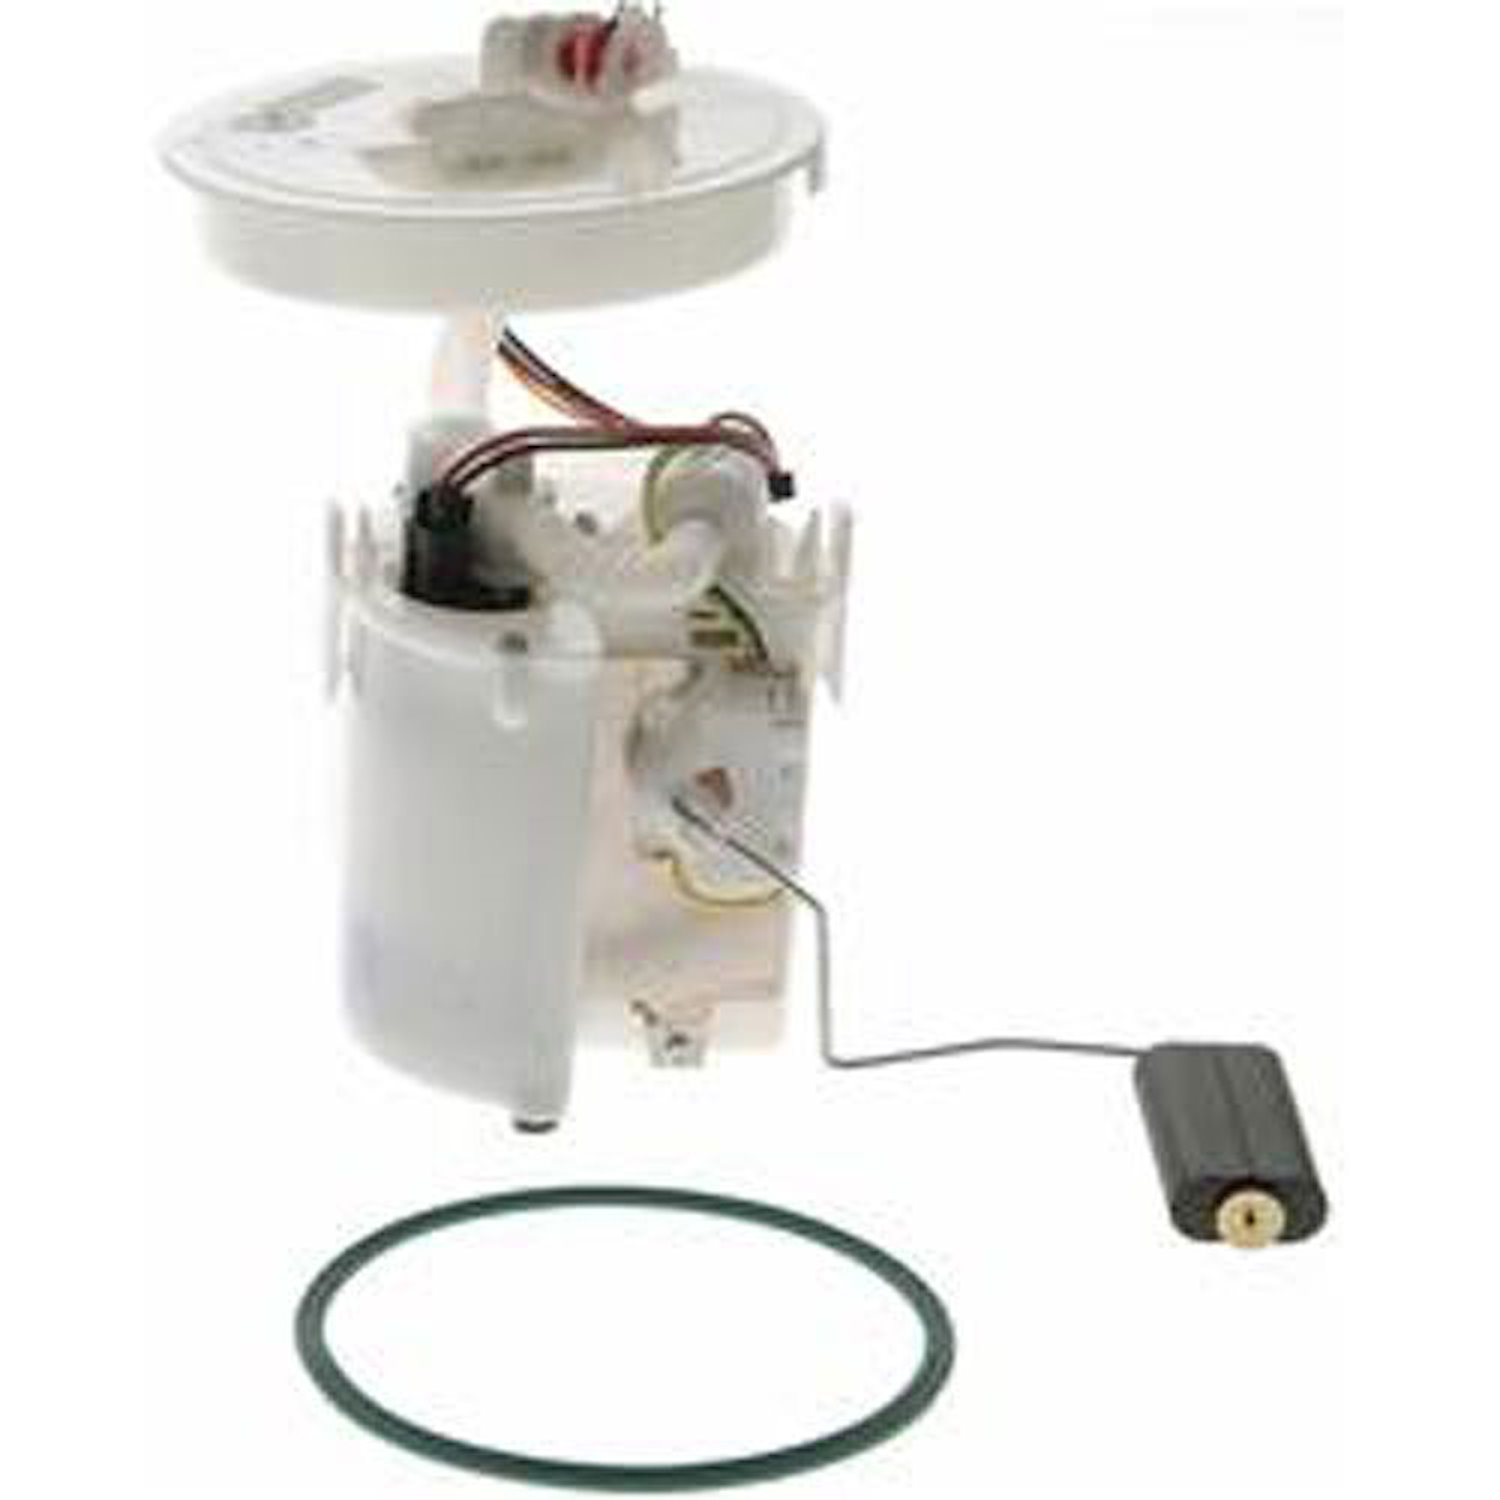 OE Ford Replacement Electric Fuel Pump Module Assembly 2002 Ford Focus 2.0L 4 Cyl